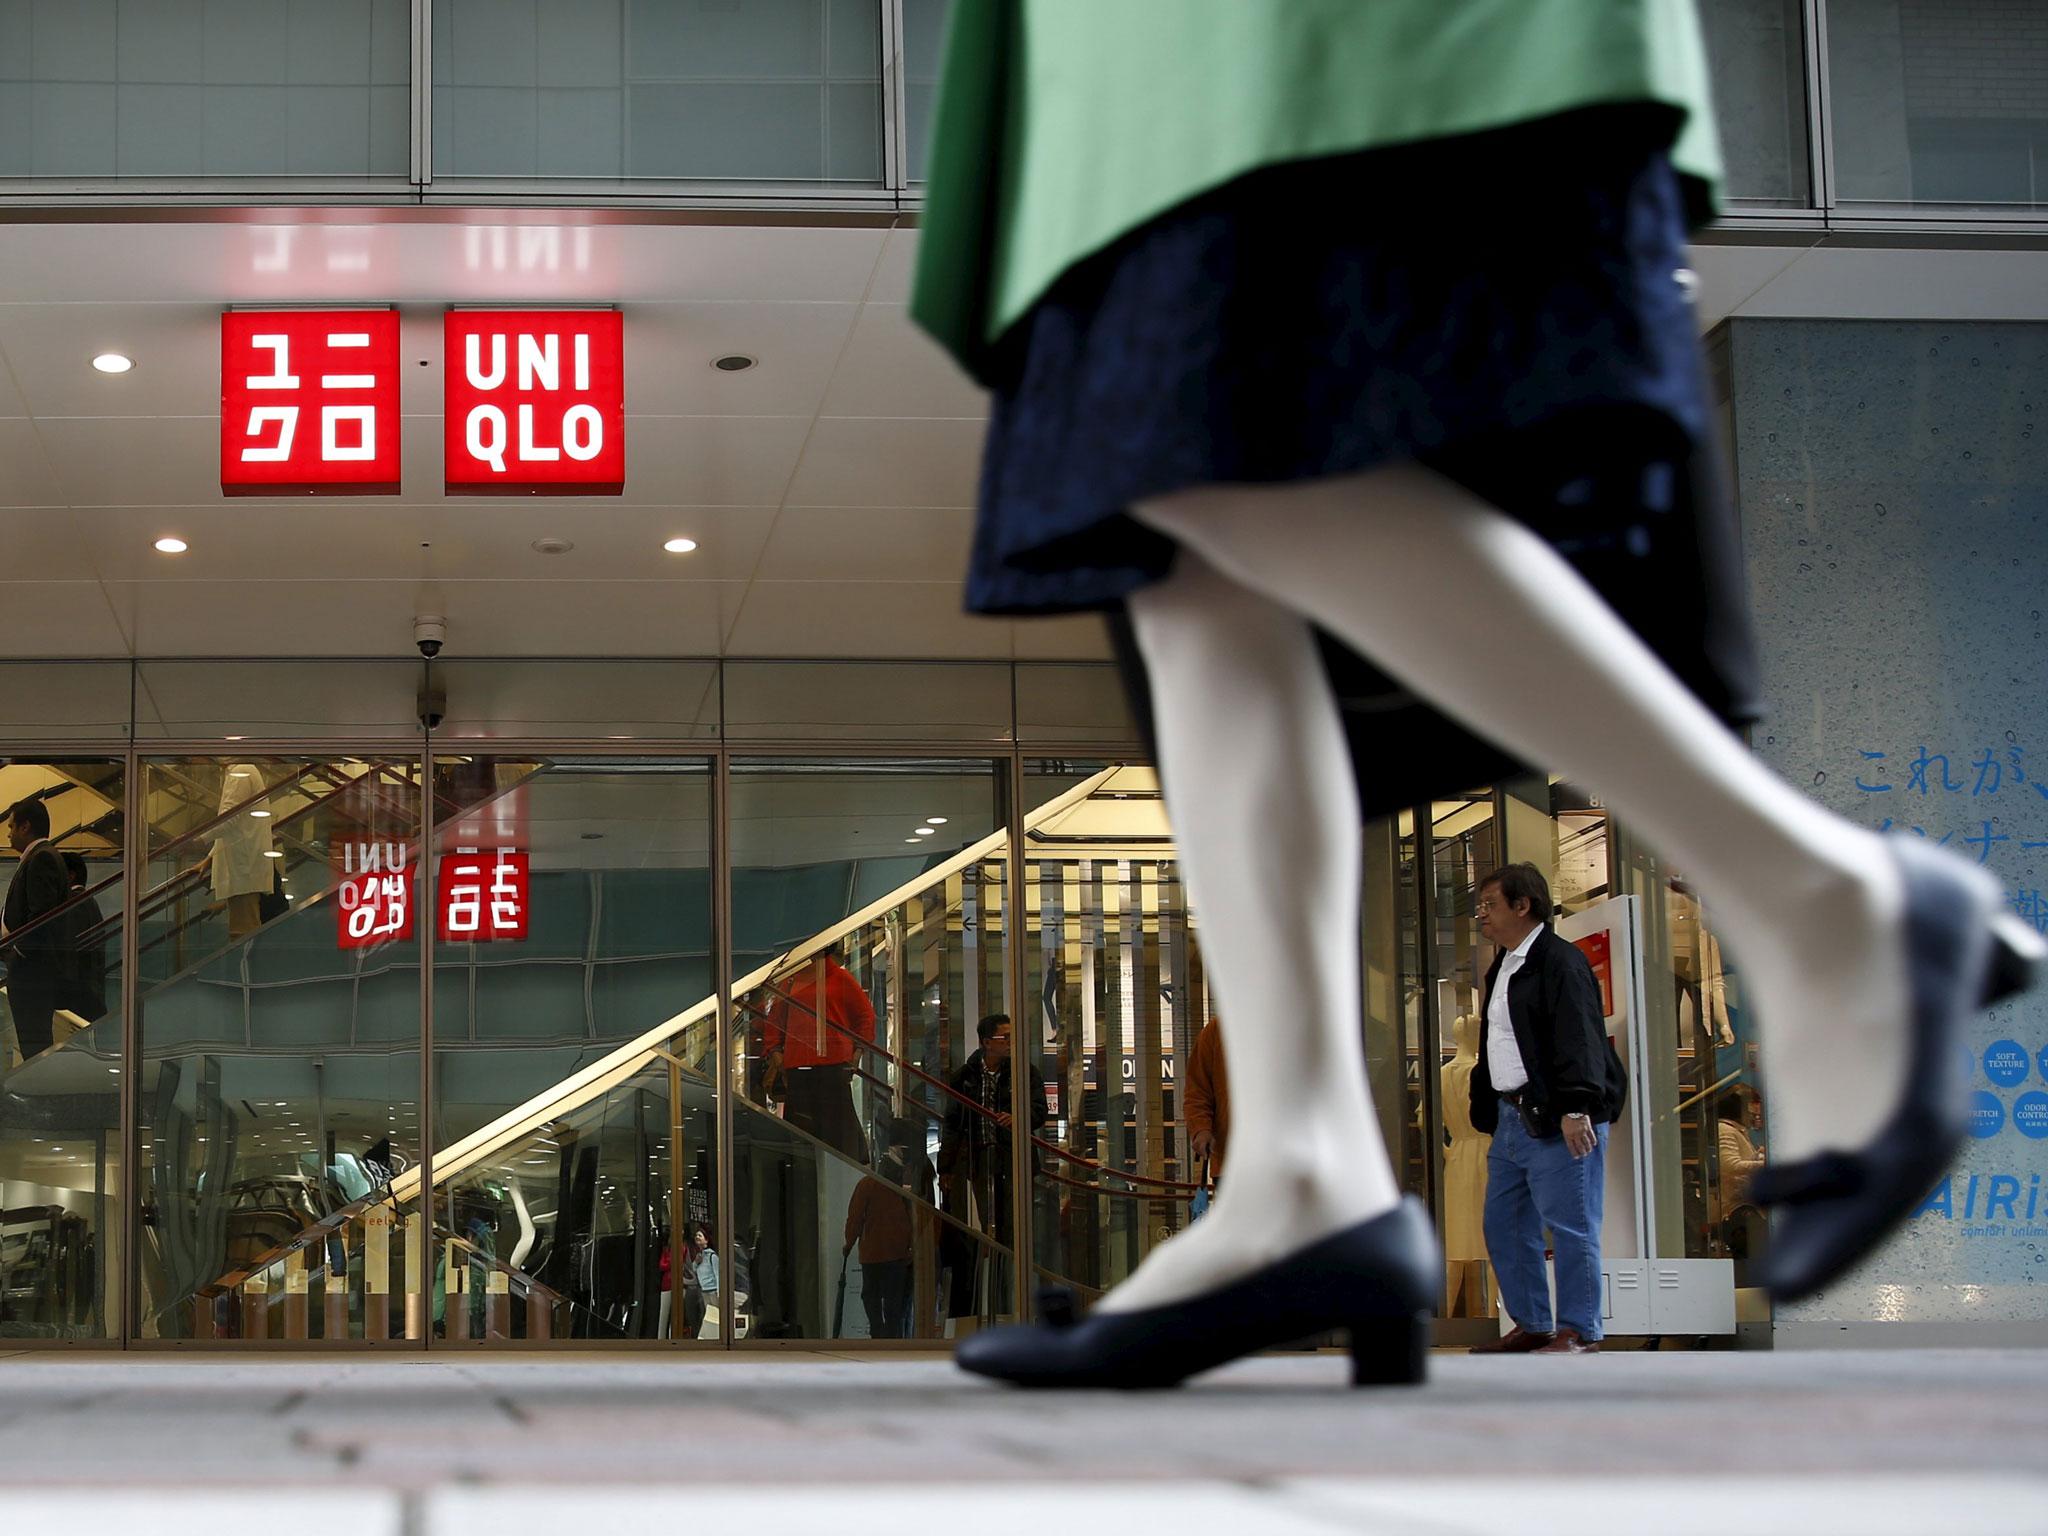 Tadashi Yanai, chairman and president of Fast Retailing, the company that owns Uniqlo, said that he would “withdraw from the United States” if import duties were imposed